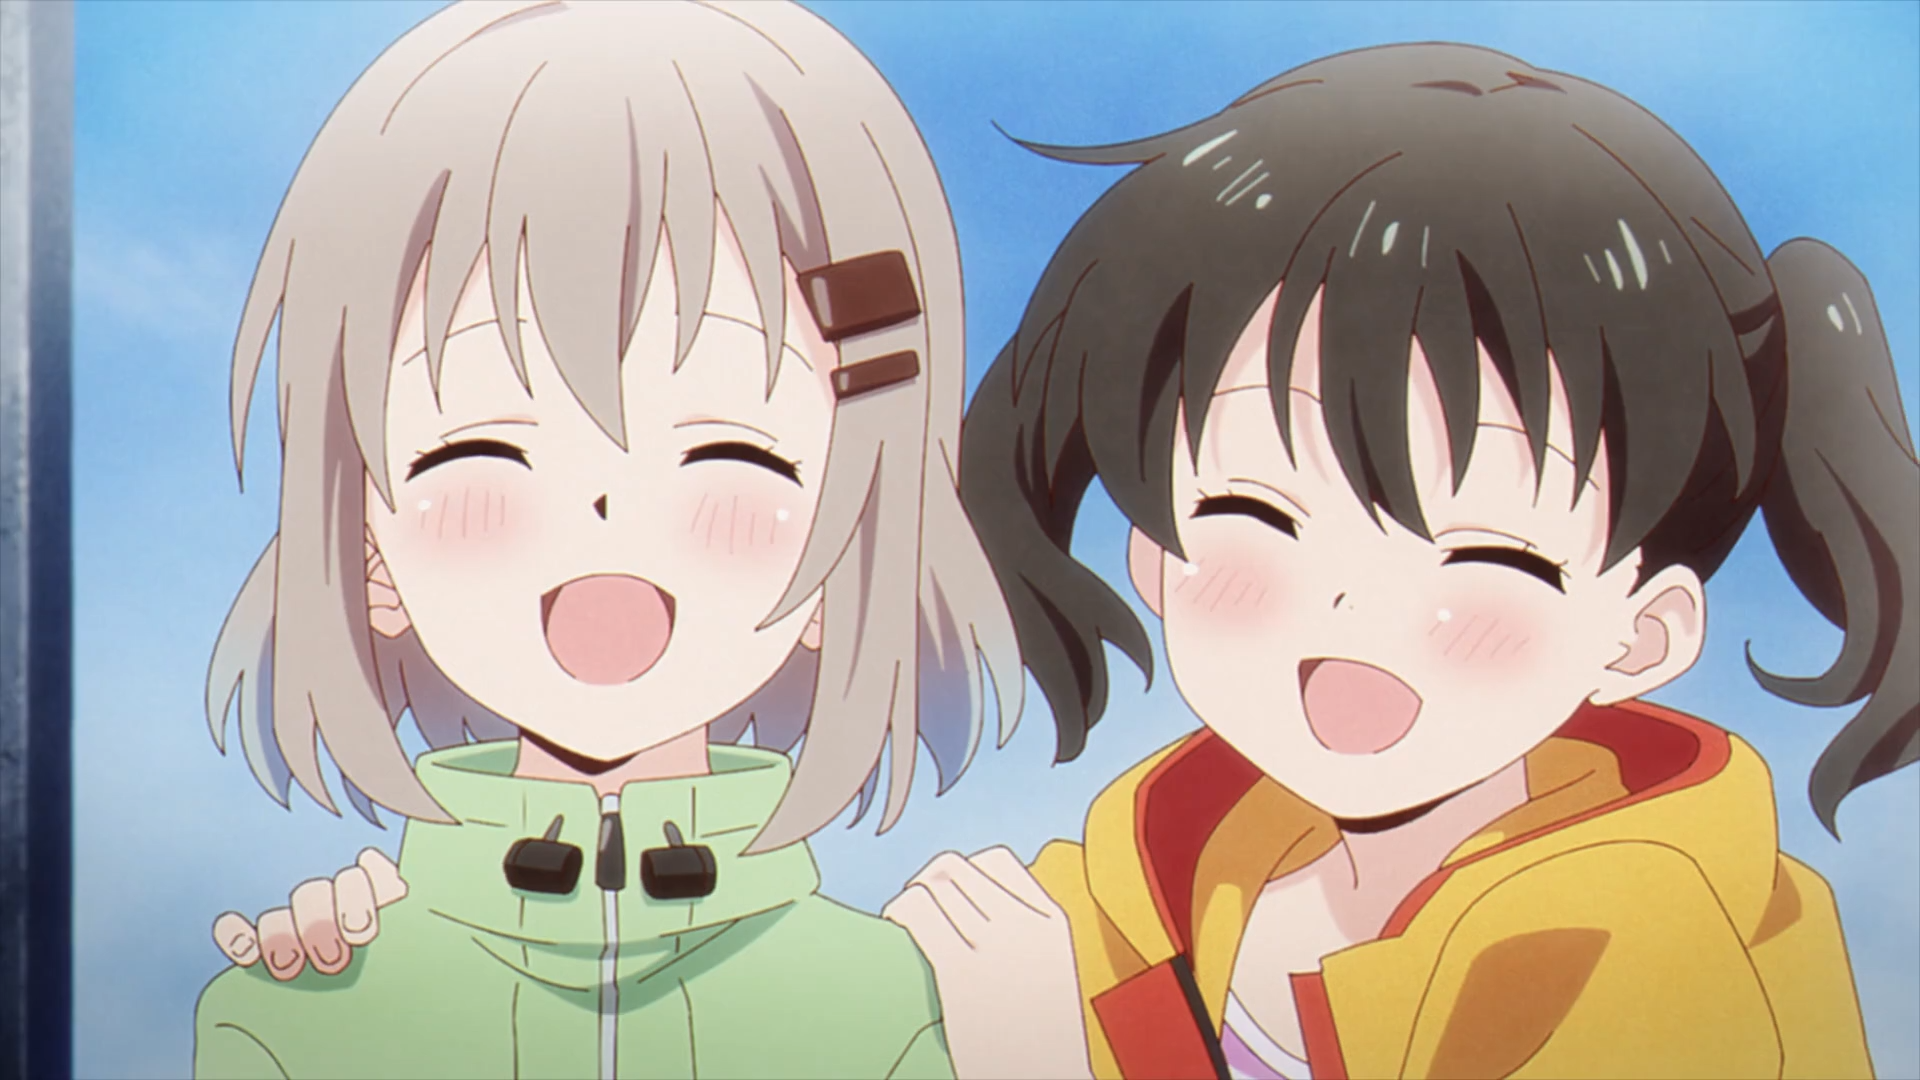 We Meet Again, Mount Fuji! – Yama no Susume: Next Summit Penultimate  Episode Review and Reflections